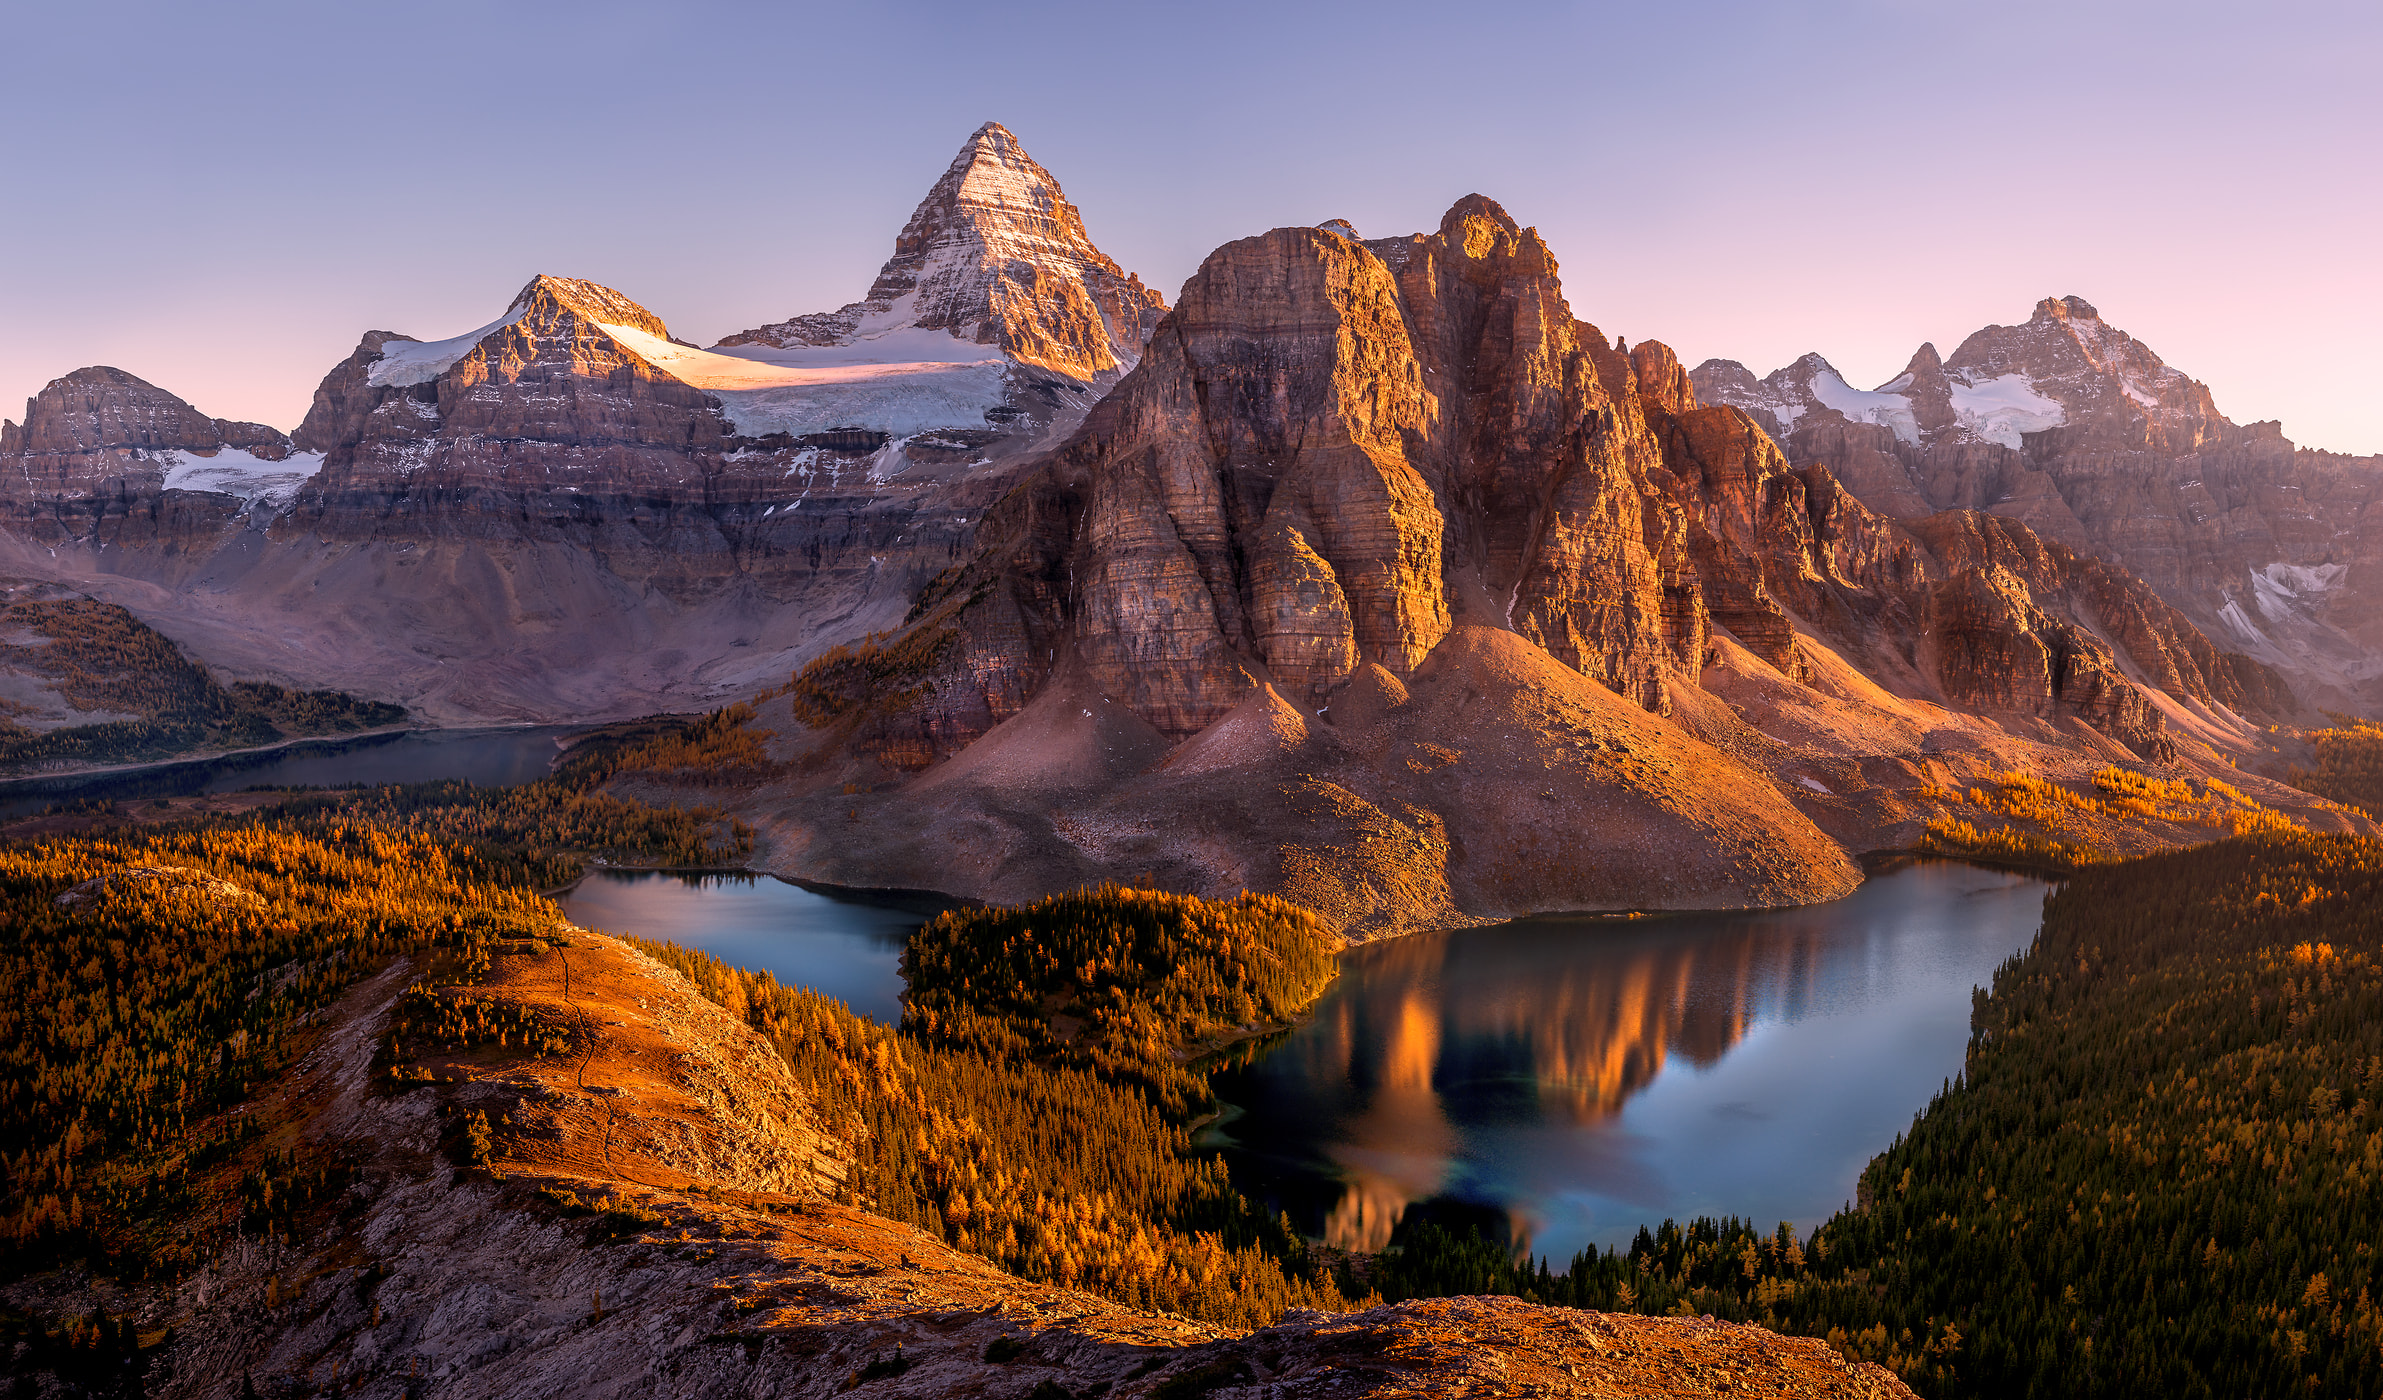 255 megapixels! A very high resolution, large-format VAST photo of Mt. Assiniboine and the Canadian Rockies in Autumn at sunset with lakes and trees; fine art mountain landscape photograph created by Tim Shields in Mt. Assiniboine Provincial Park, British Columbia, Canada